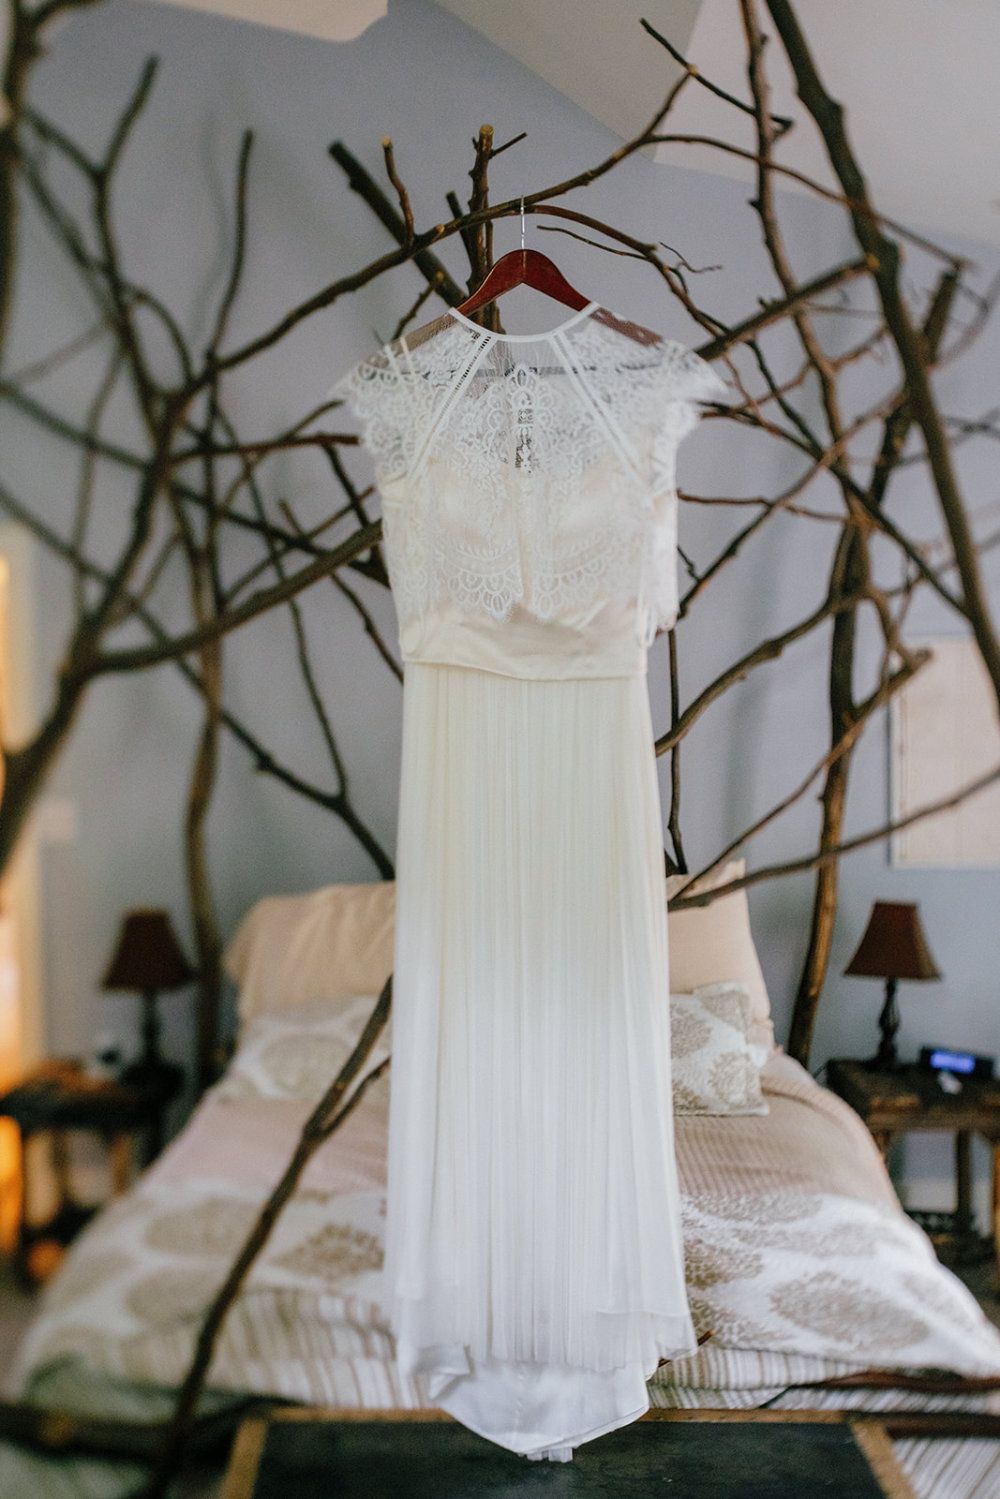 A white wedding gown hangs from the American Hornbeam bed frame.